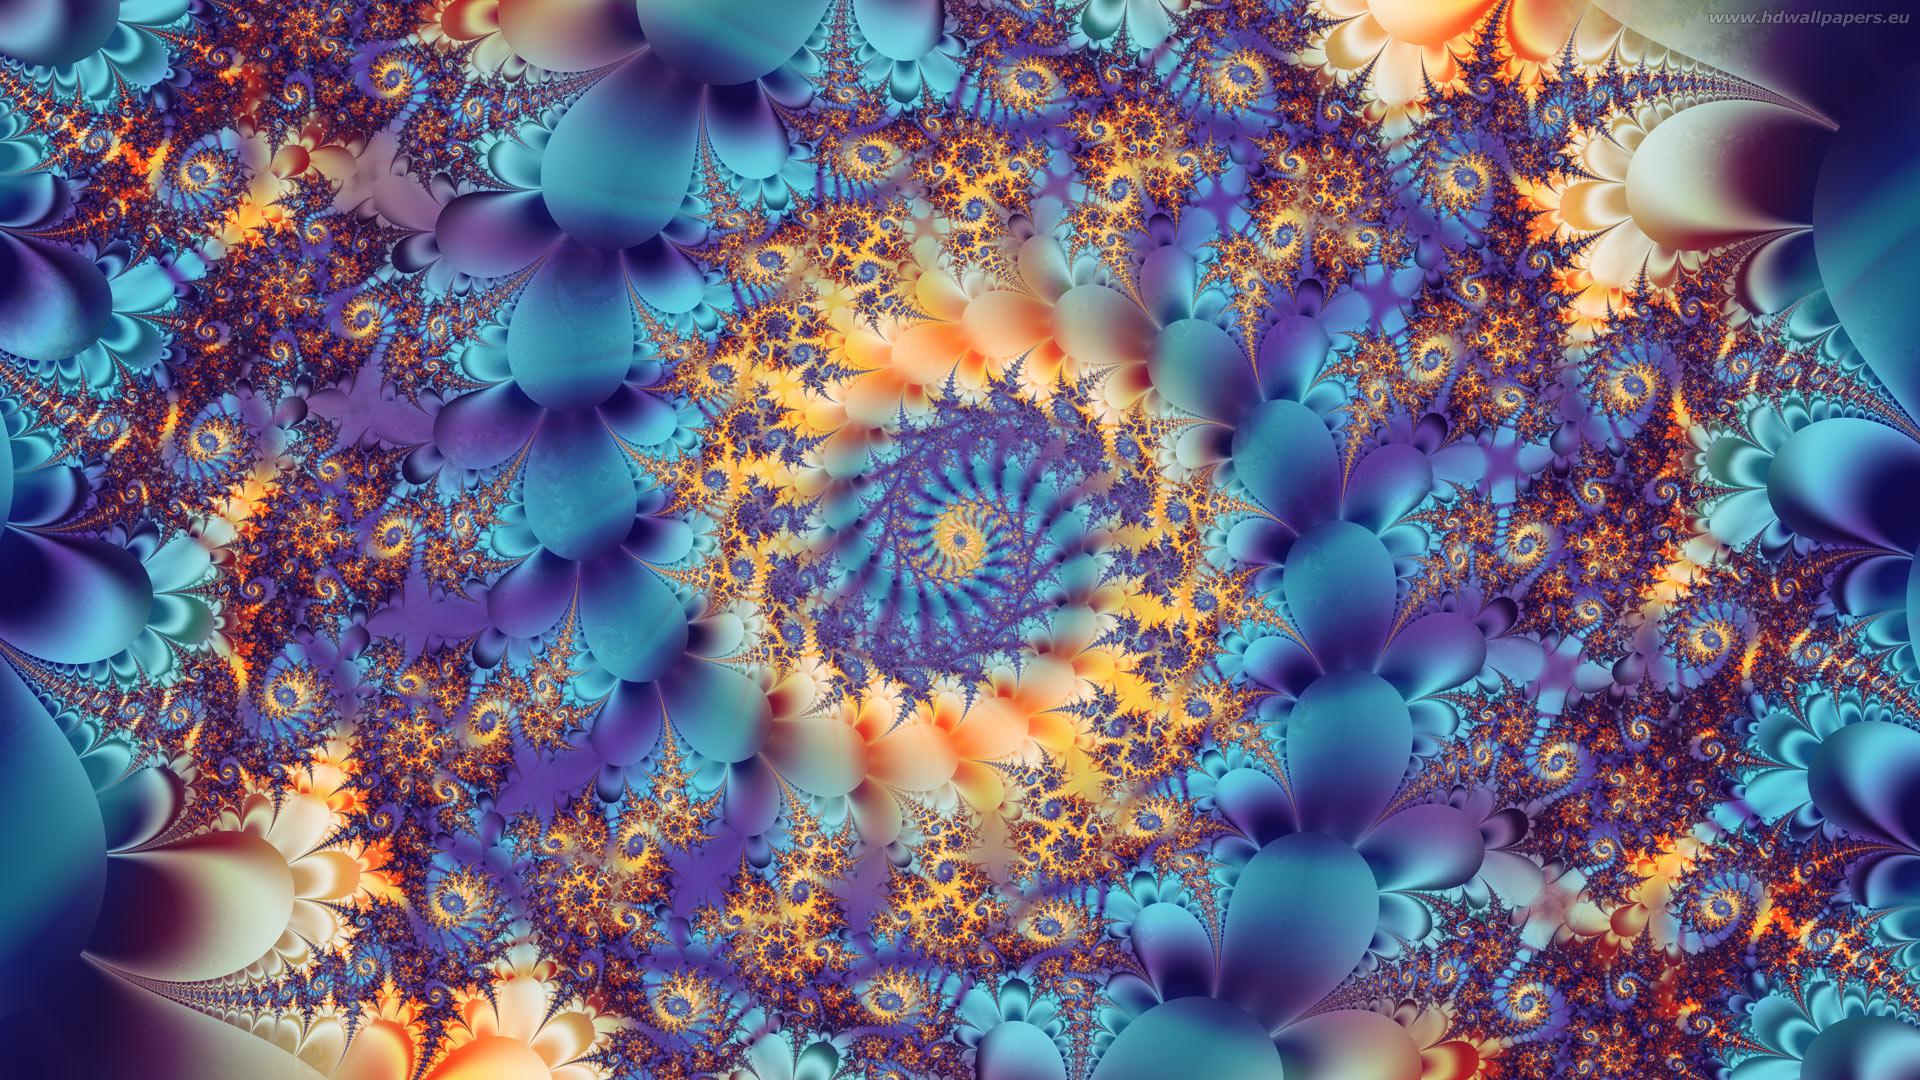 Fractal Patterns In Nature And Art Are Aesthetically Pleasing And